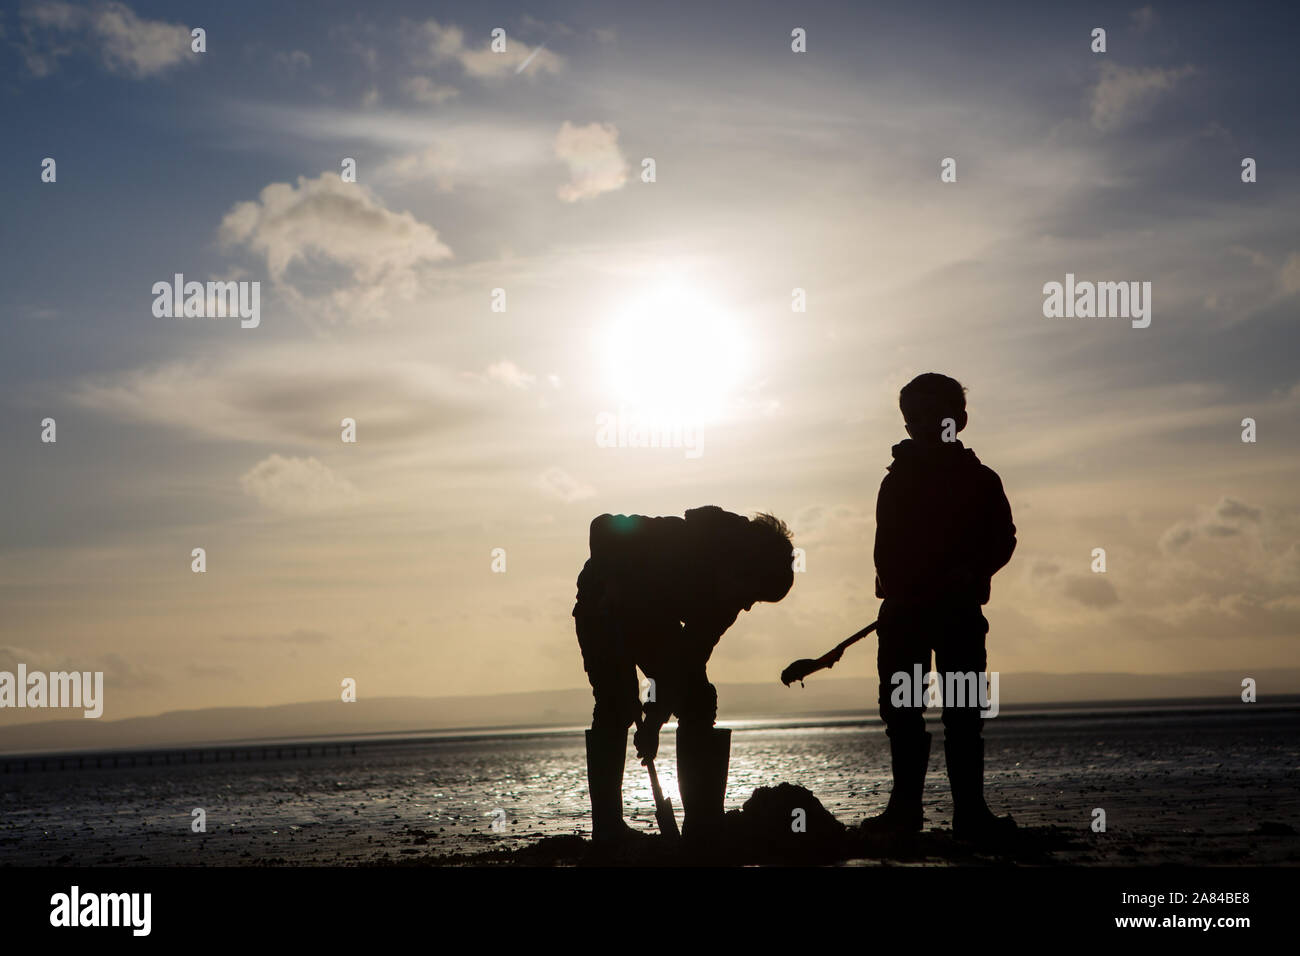 A silhouette of two young boys digging and making sandcastles on the beach in winter, UK Stock Photo